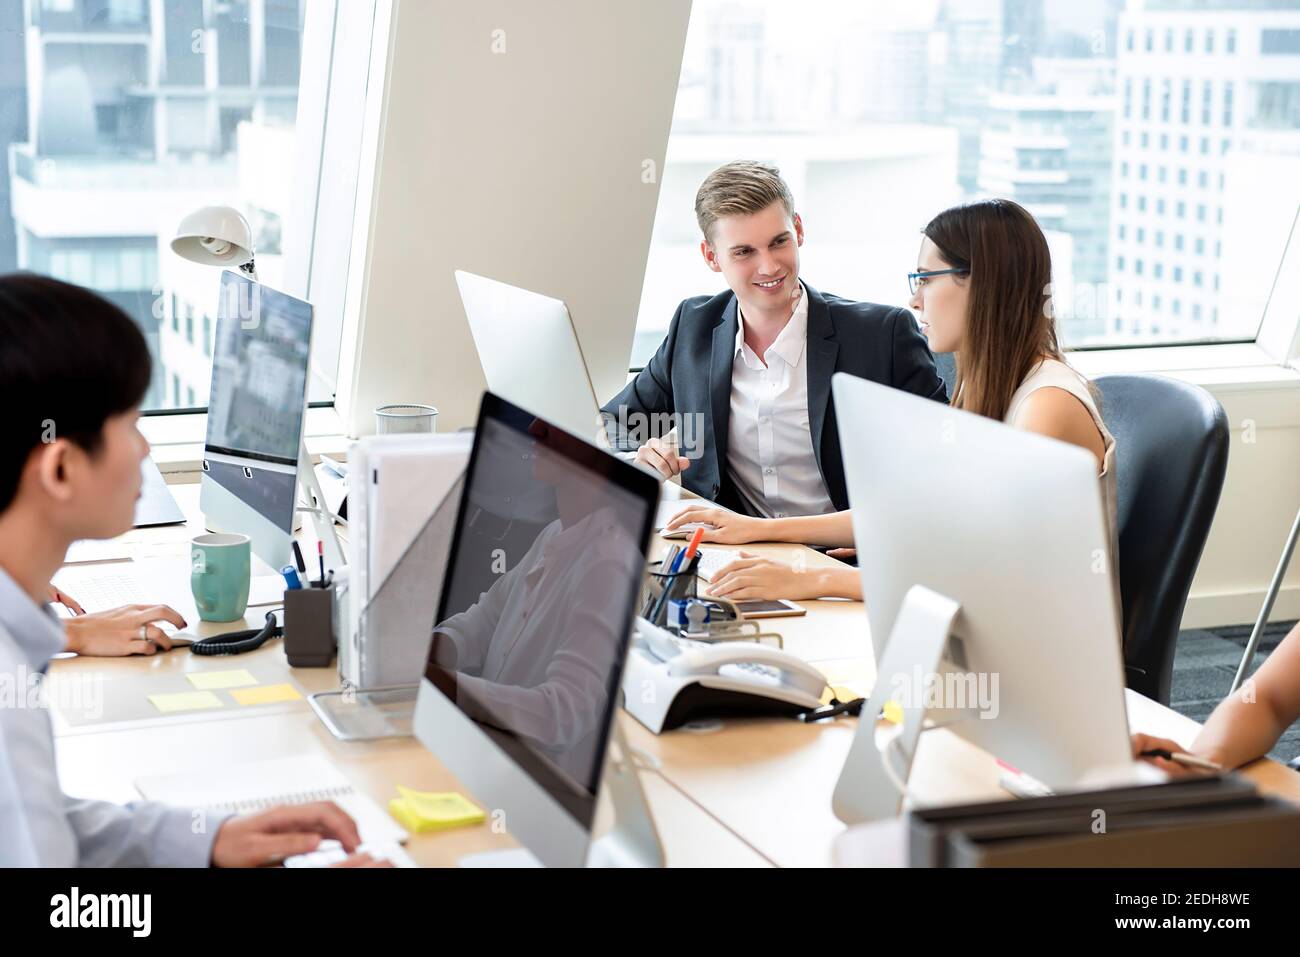 Group of business people coworkers working in office space on high rise building in the city Stock Photo